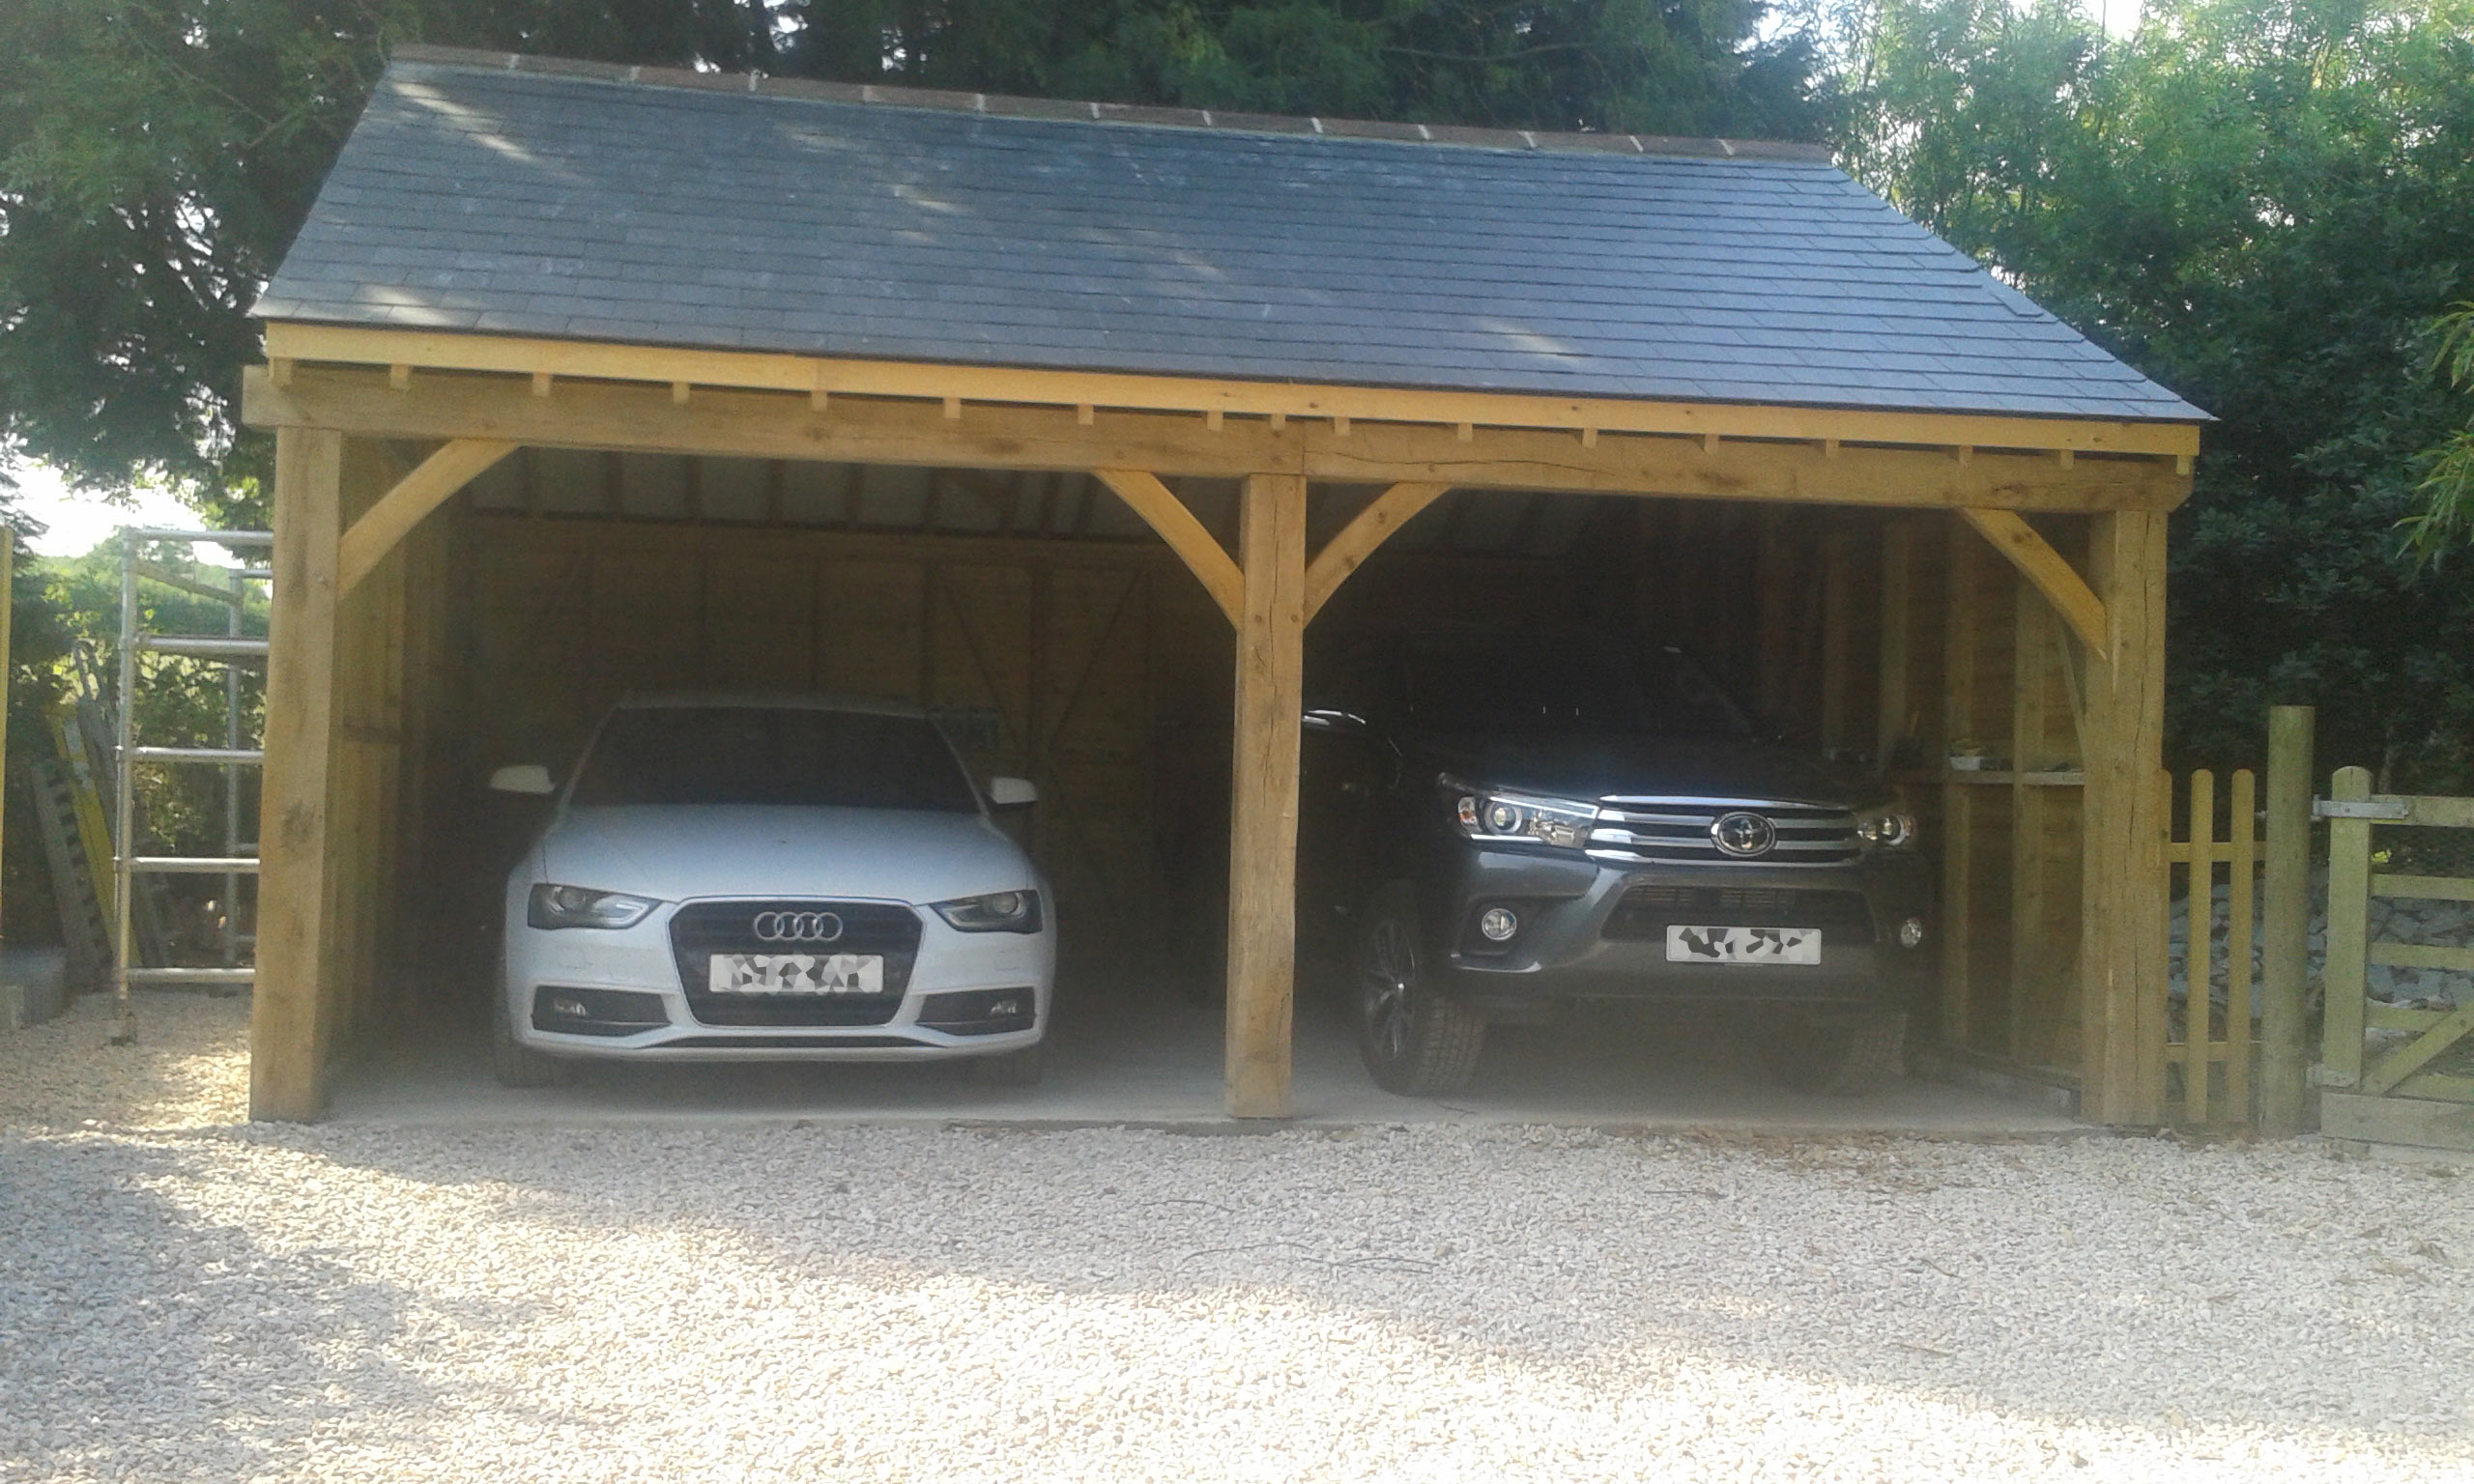 The completed Carport